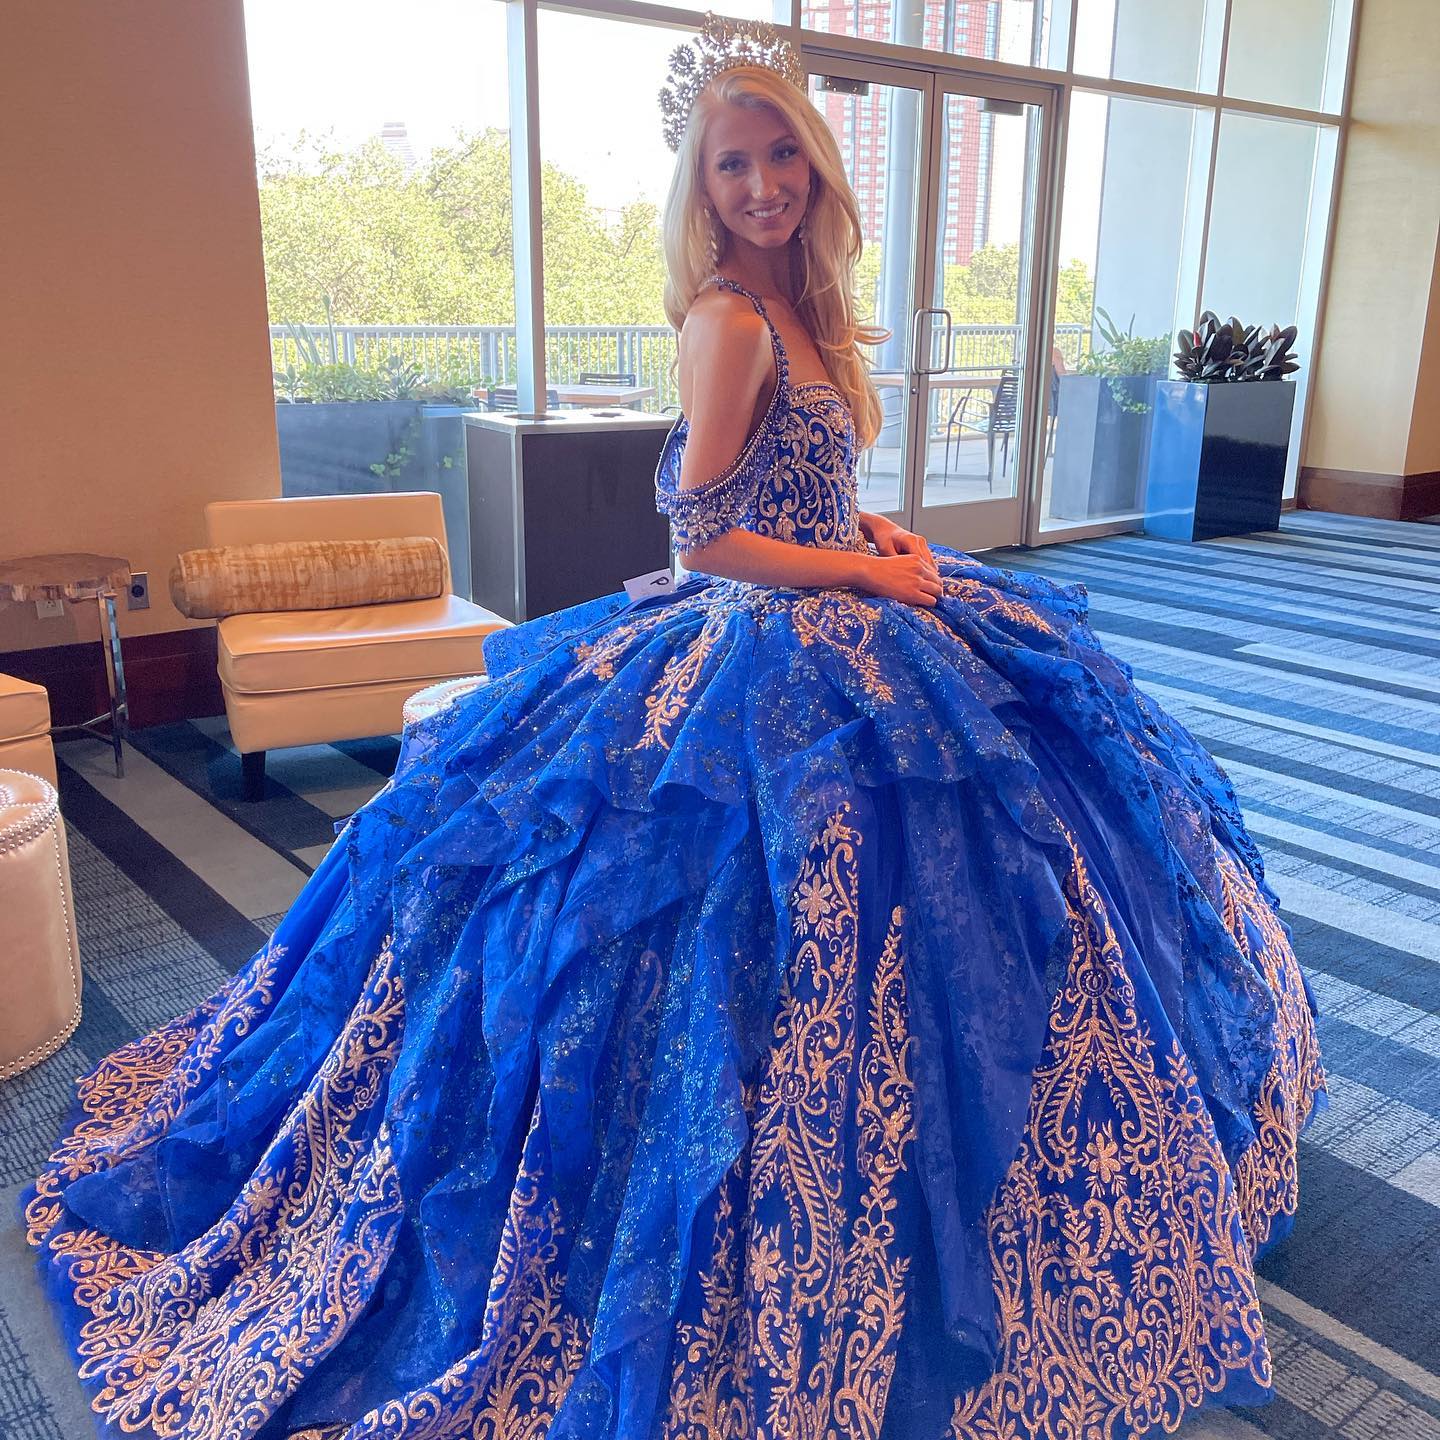 

Royal-Blue Gold Quinceanera Dress 2023 Puffy Crackled Lace Sweet 16 Ball Gown Glitter Tulle Vestidos De 15 Anos Lace-Up Corset Back Cold Shoulder Sweetheart Quince Red, Same as image